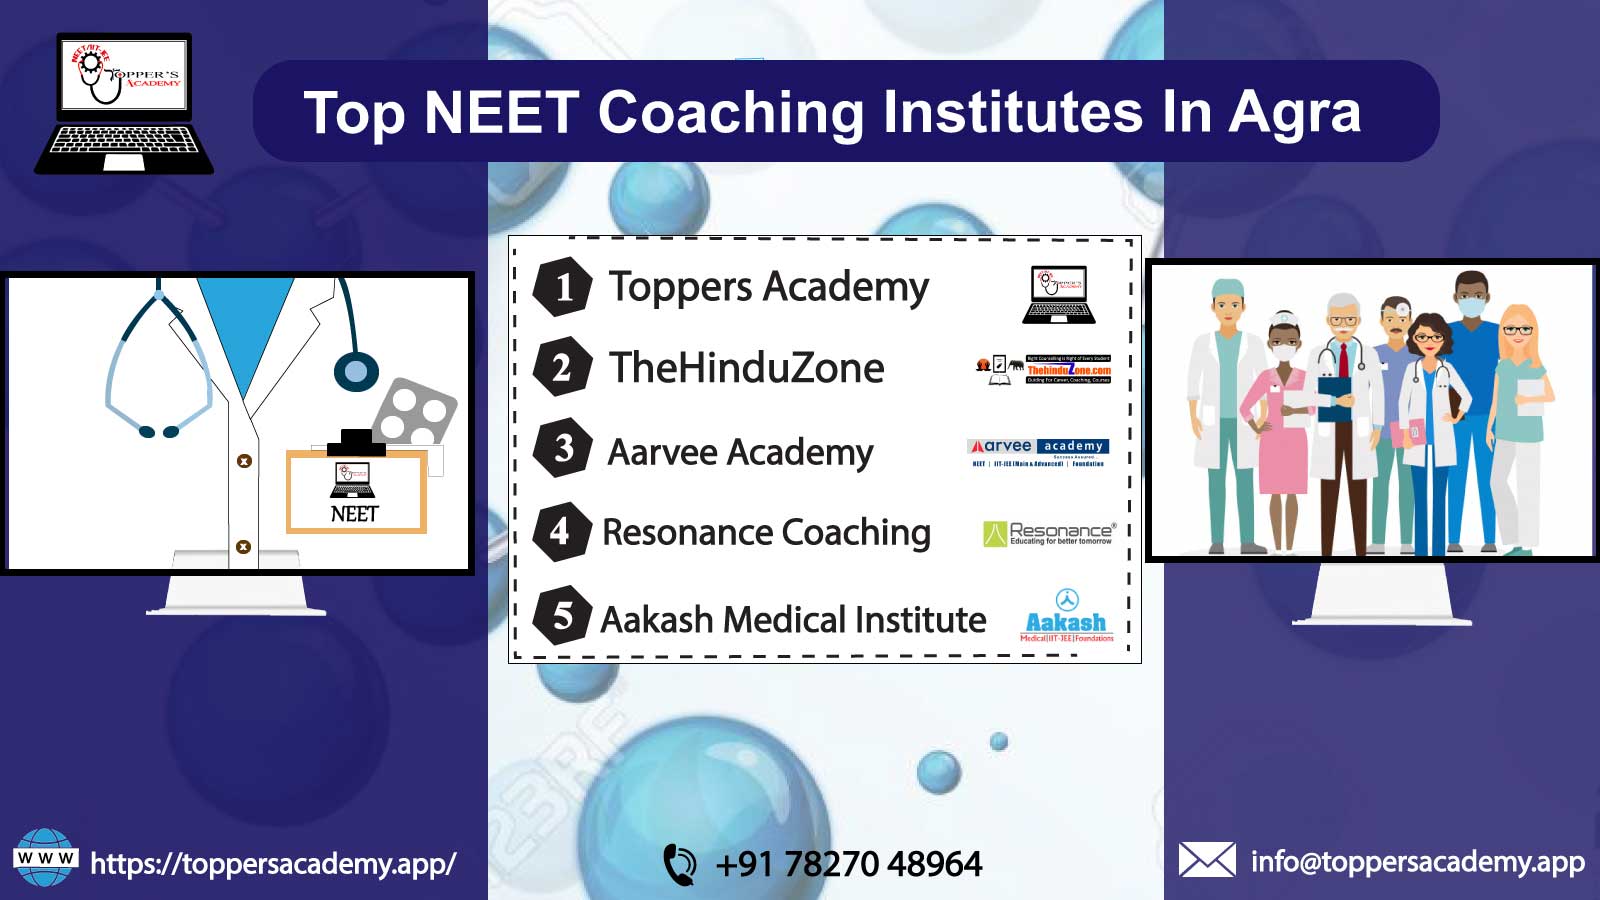 list of the top NEET Coaching In Agra